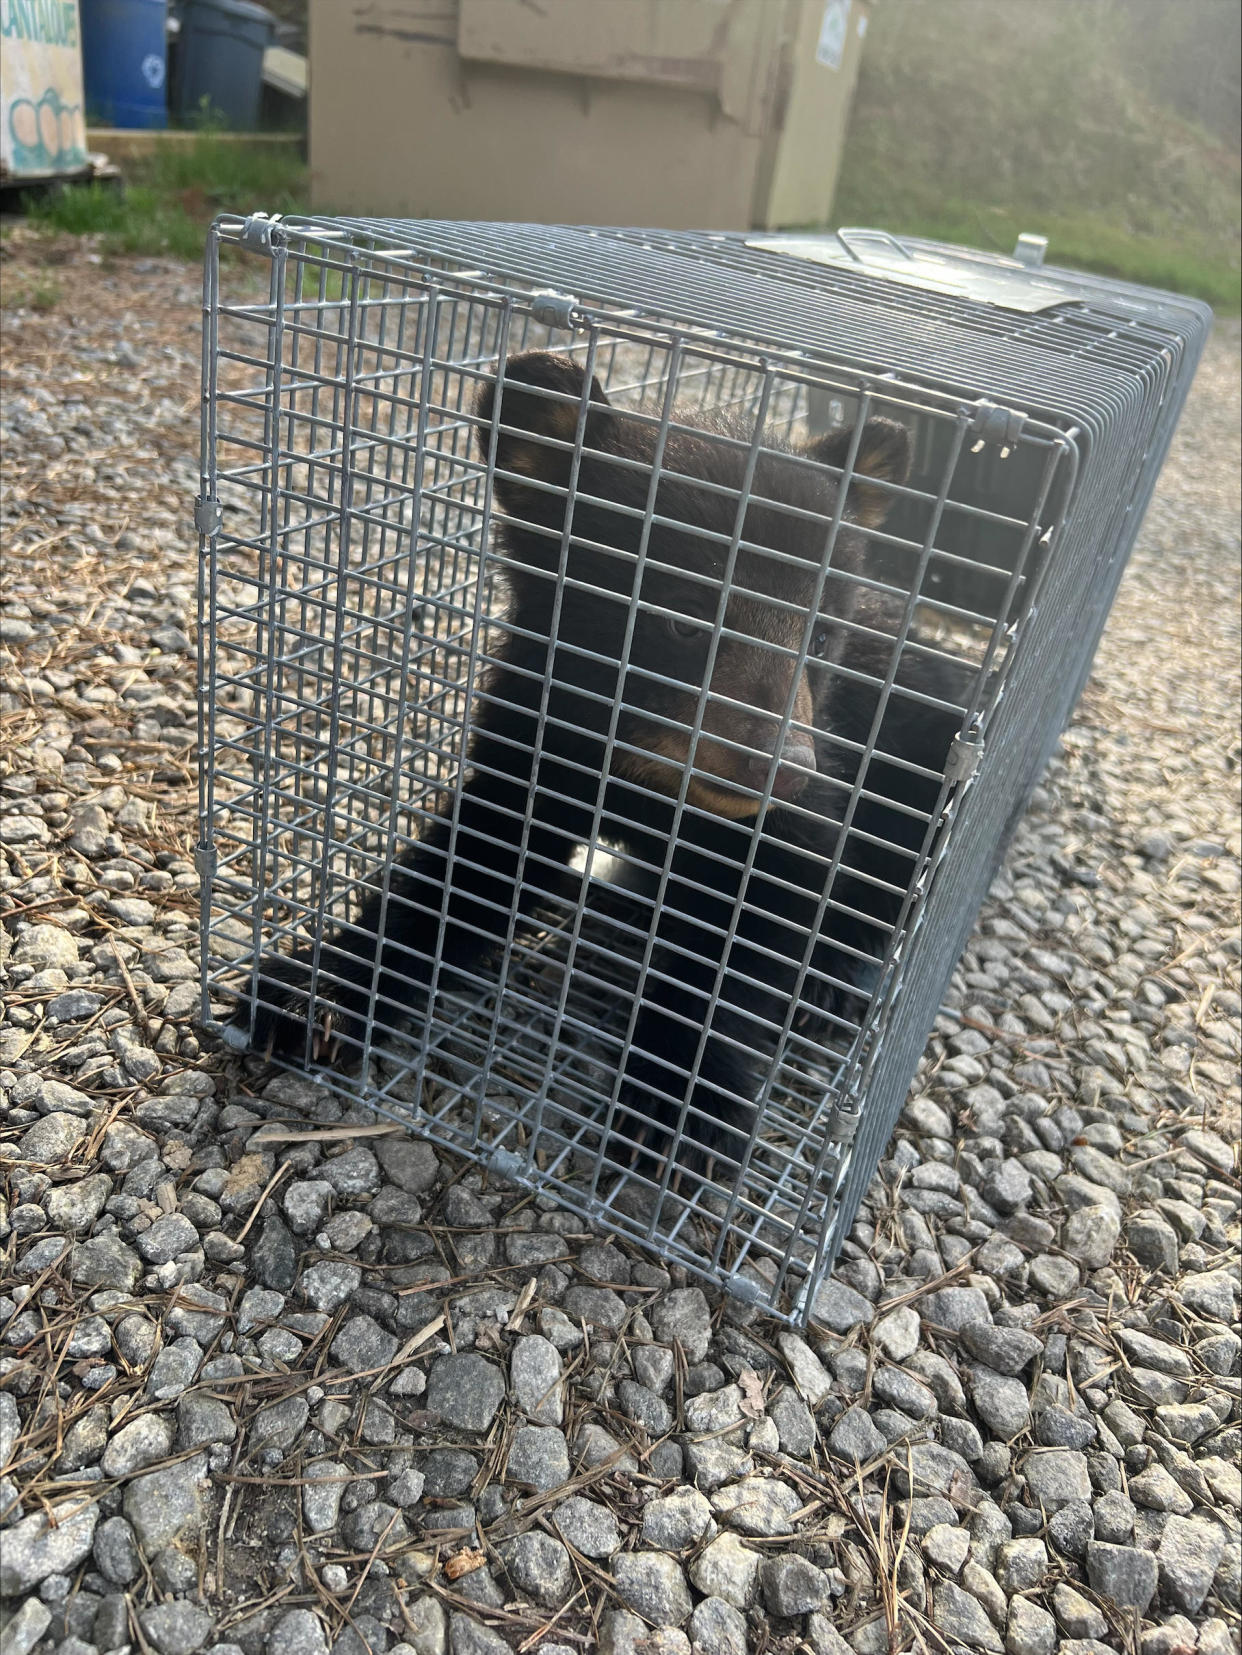 A bear cub in Asheville, North Carolina, being prepared for transport to a rehabilitation center after a group of people pulled it from a tree to take pictures. / Credit: North Carolina Wildlife Resources Commission